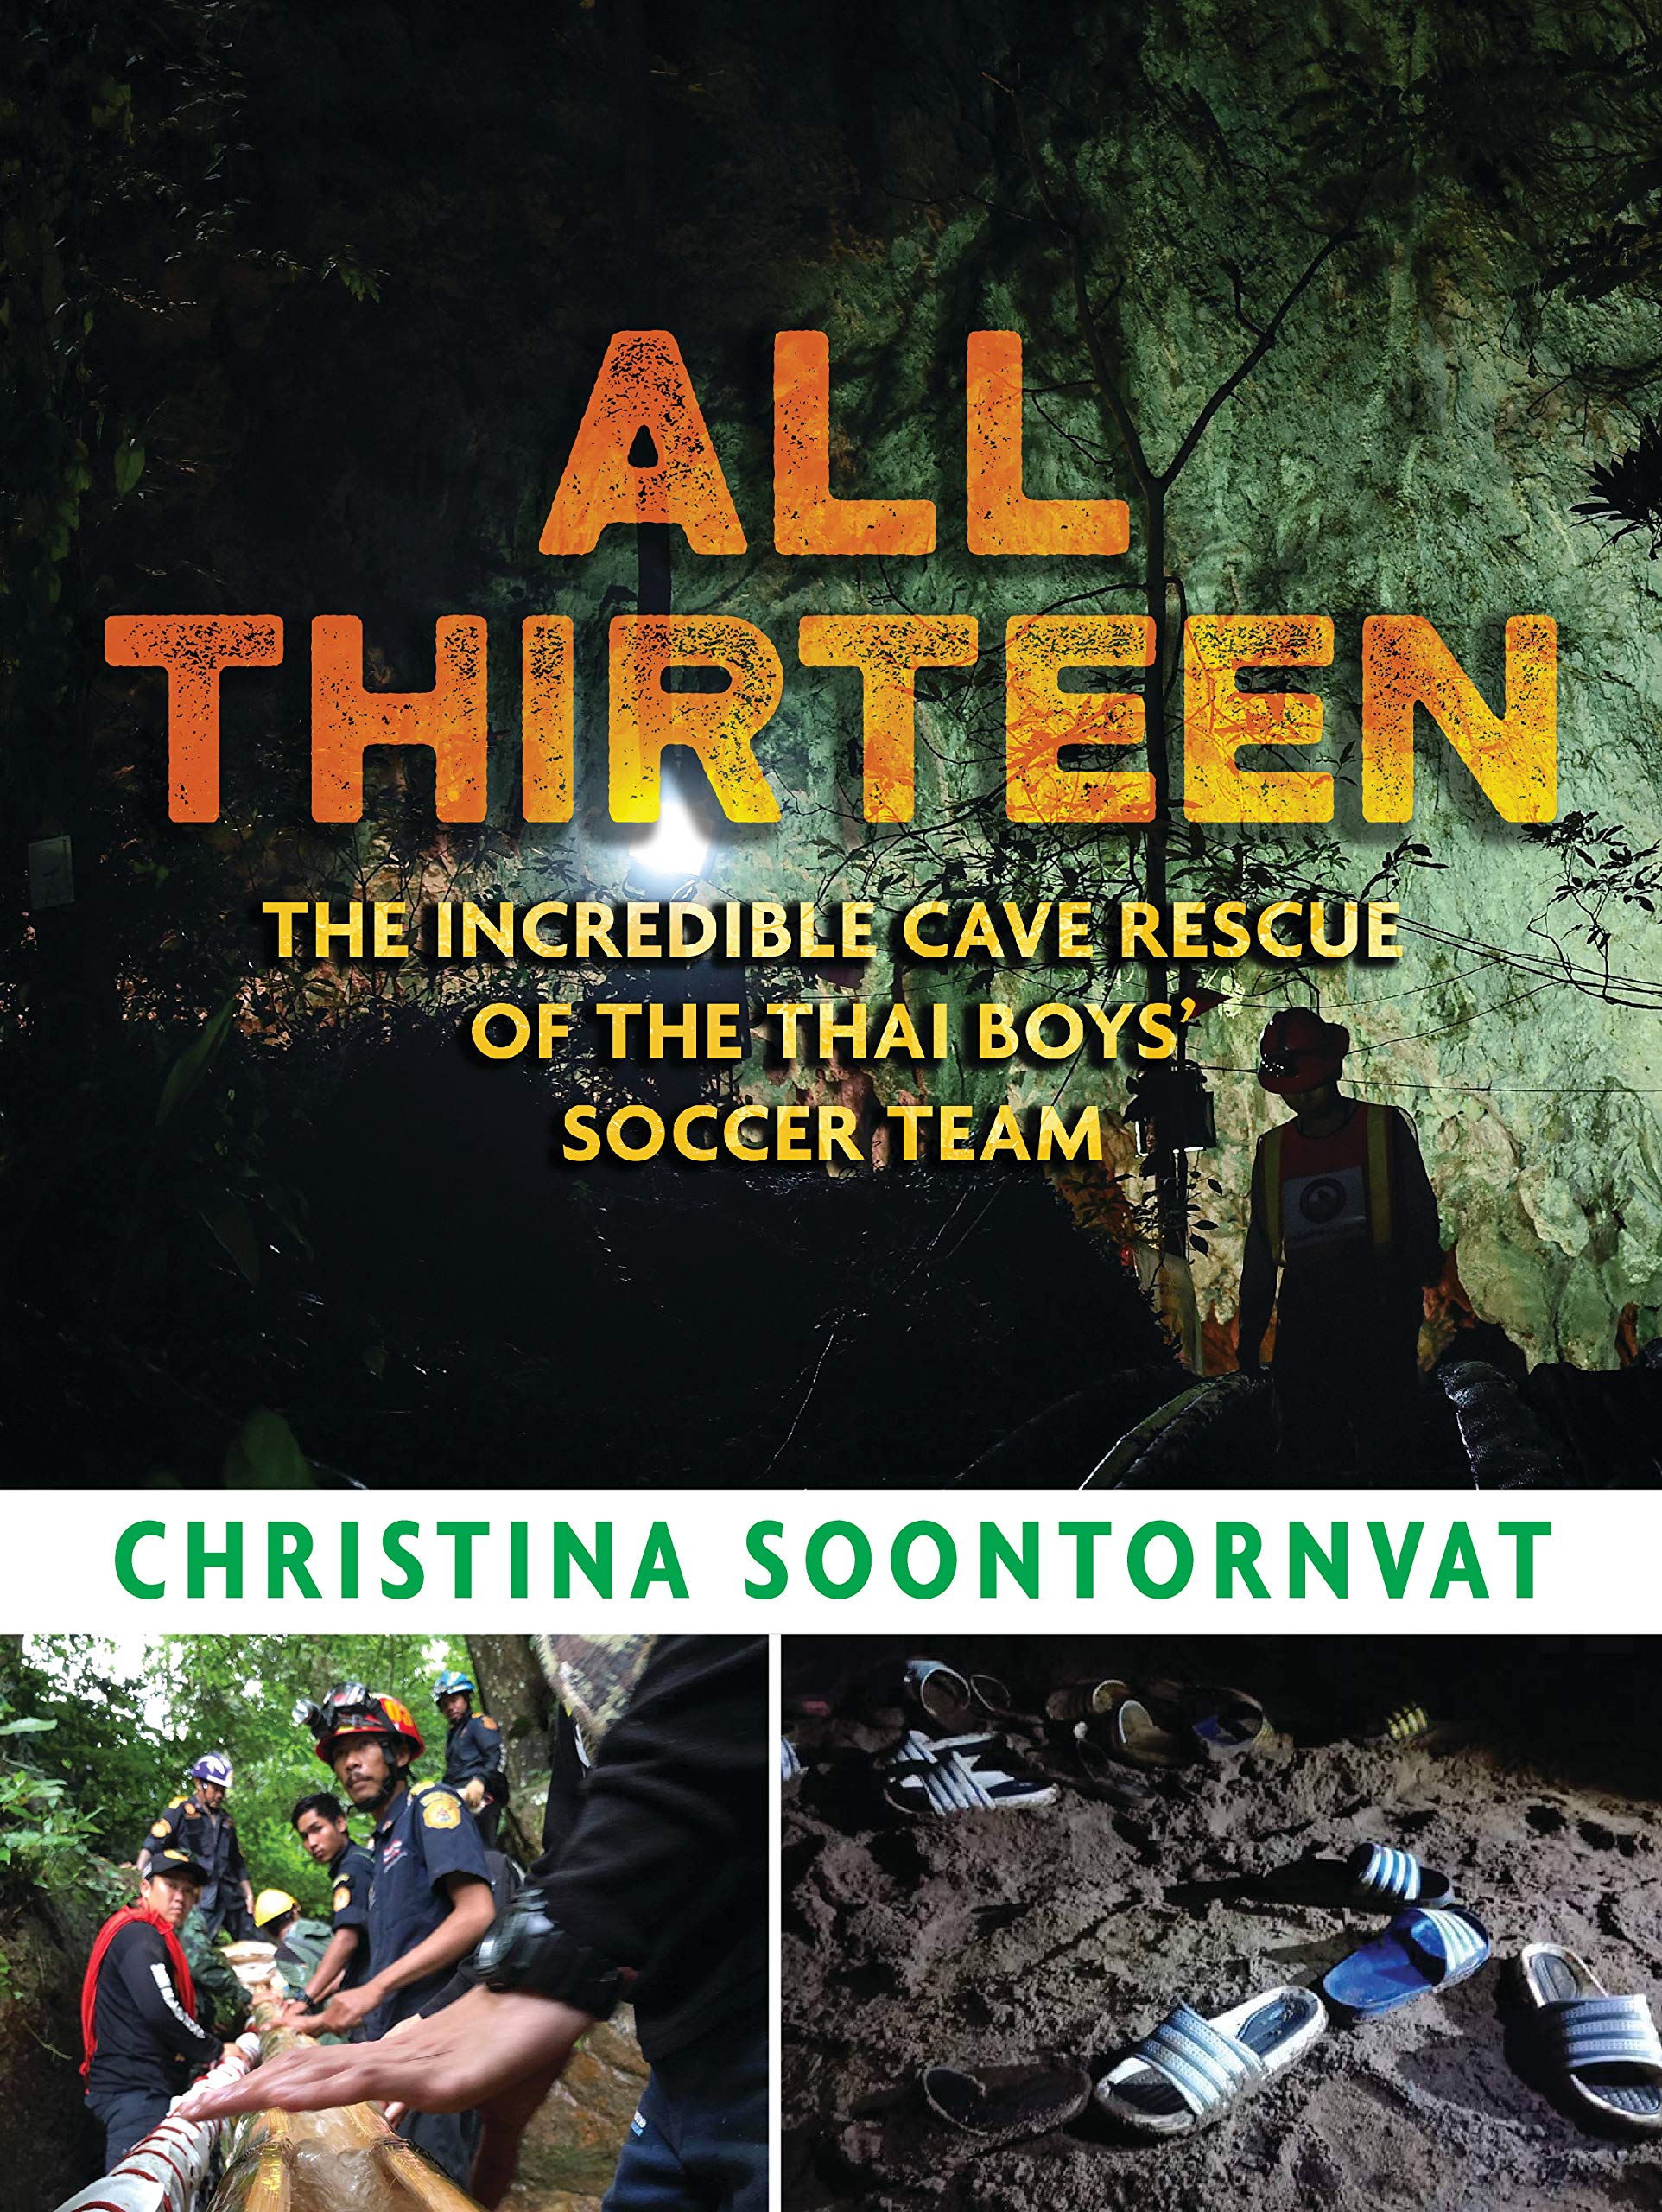 middle school books - All Thirteen by Christina Soontornvat